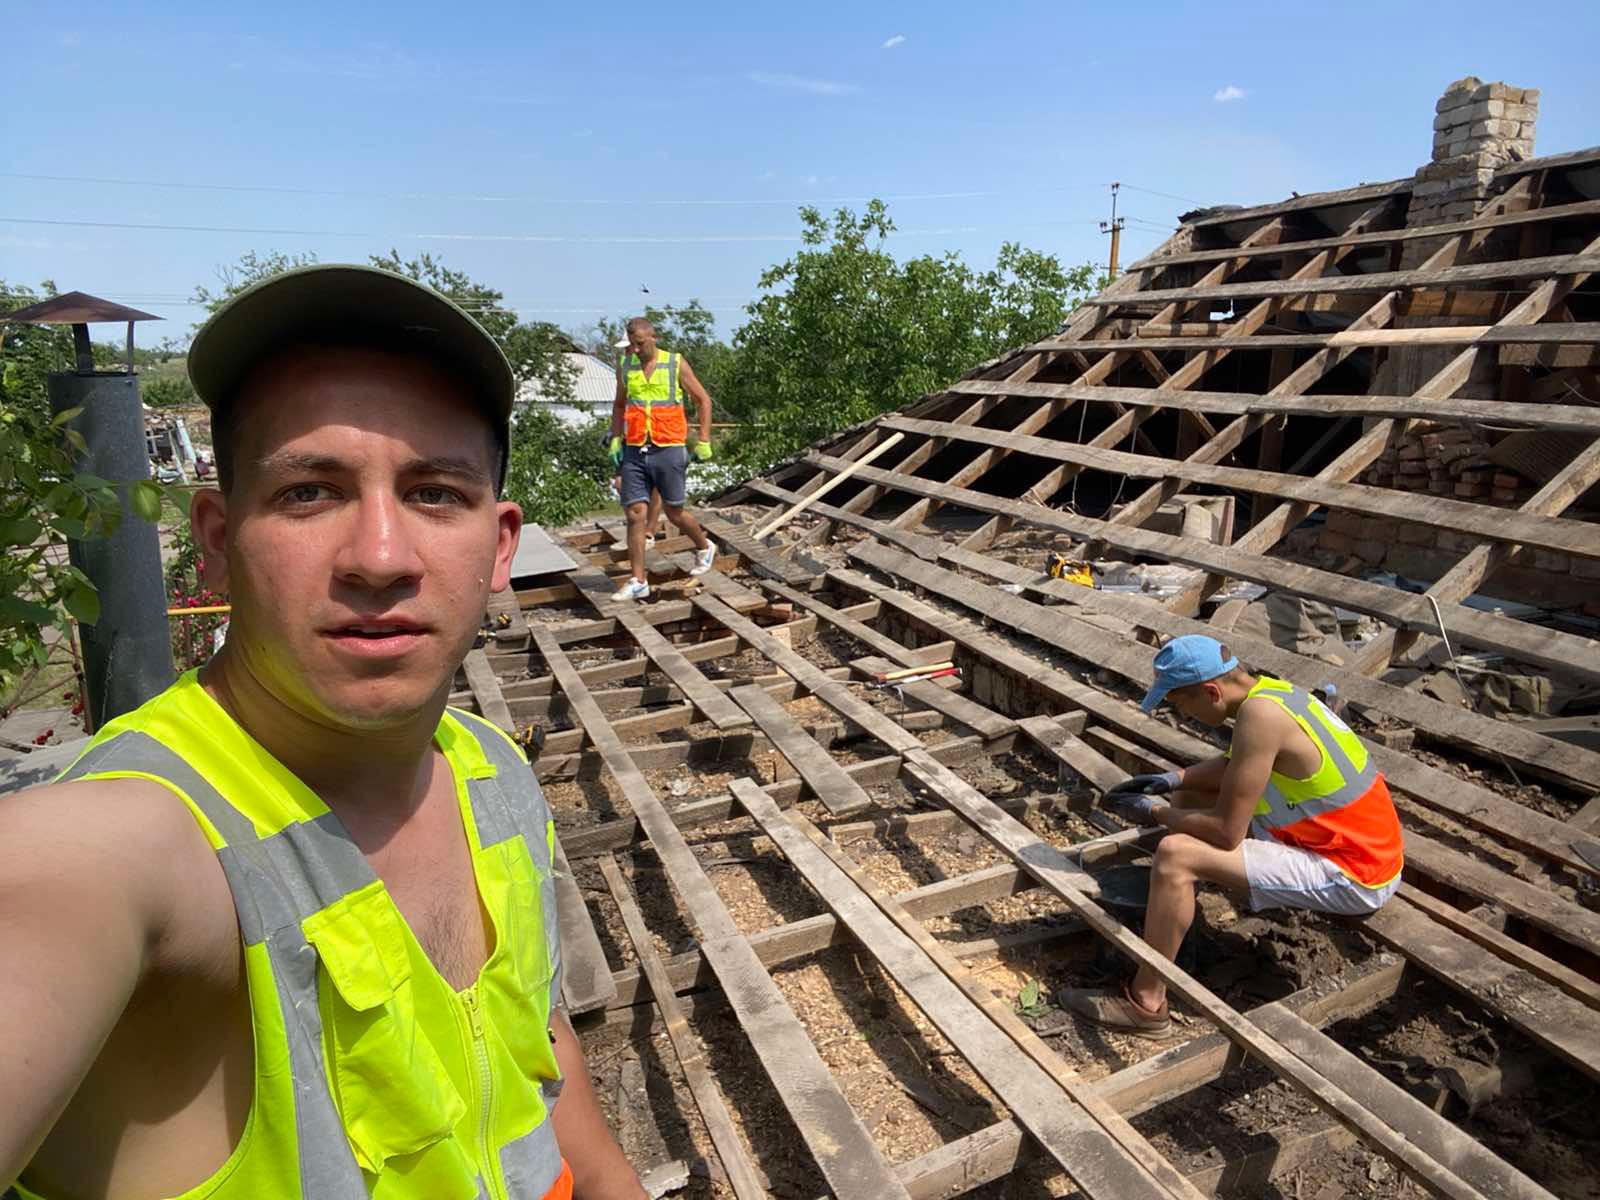 A man takes a selfie while working on a roof.